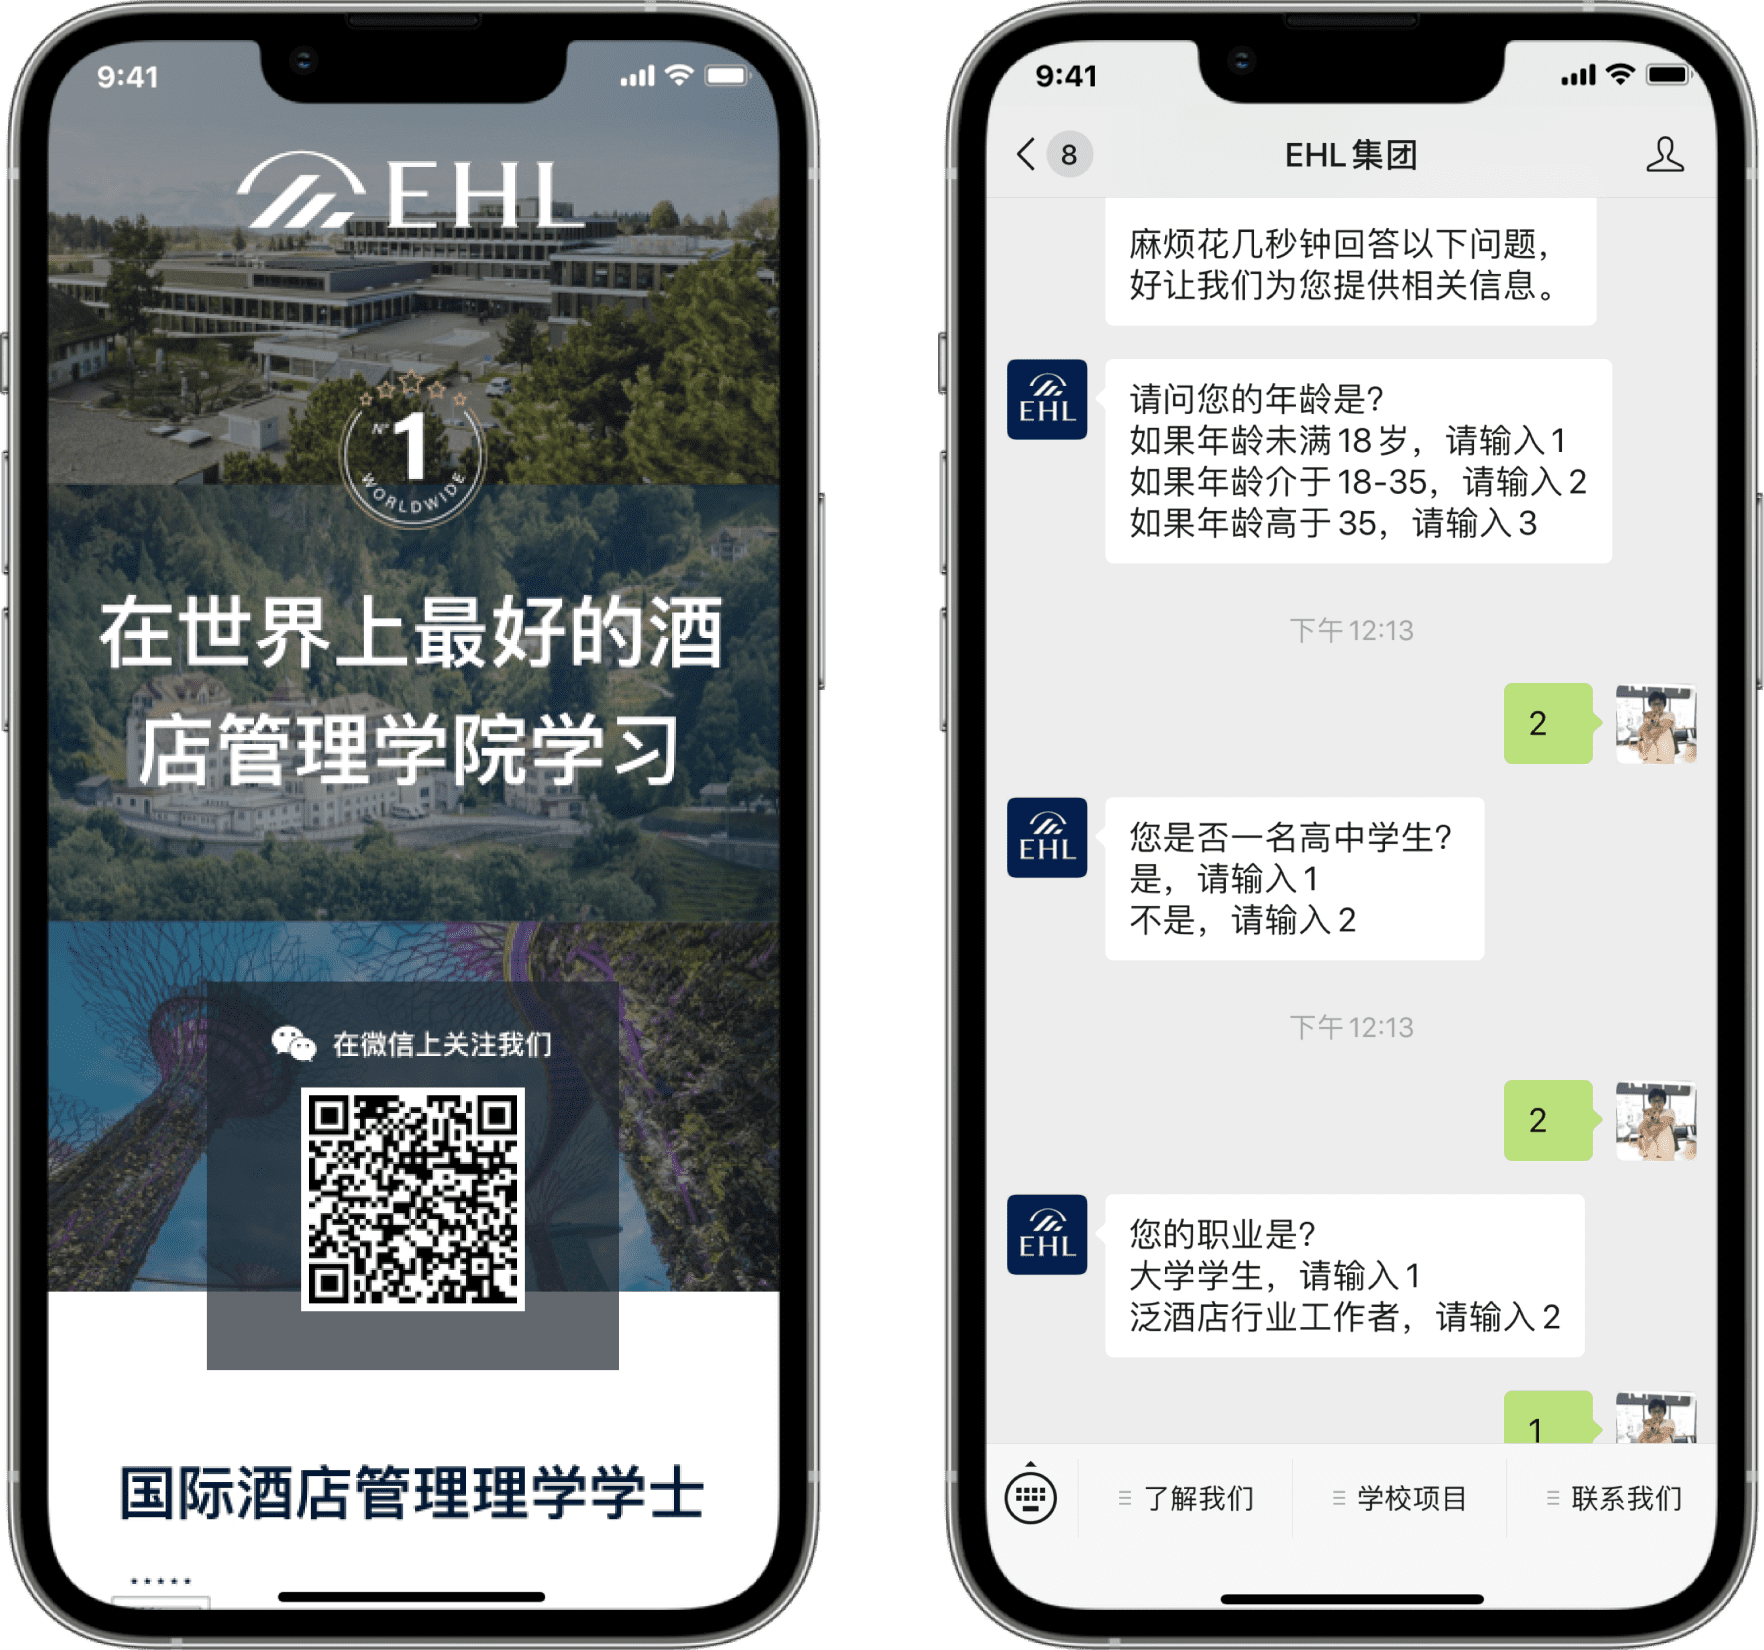 IT Consultis helped EHL transform its WeChat Official Account, including the integration with the SCRM tool Jing Social